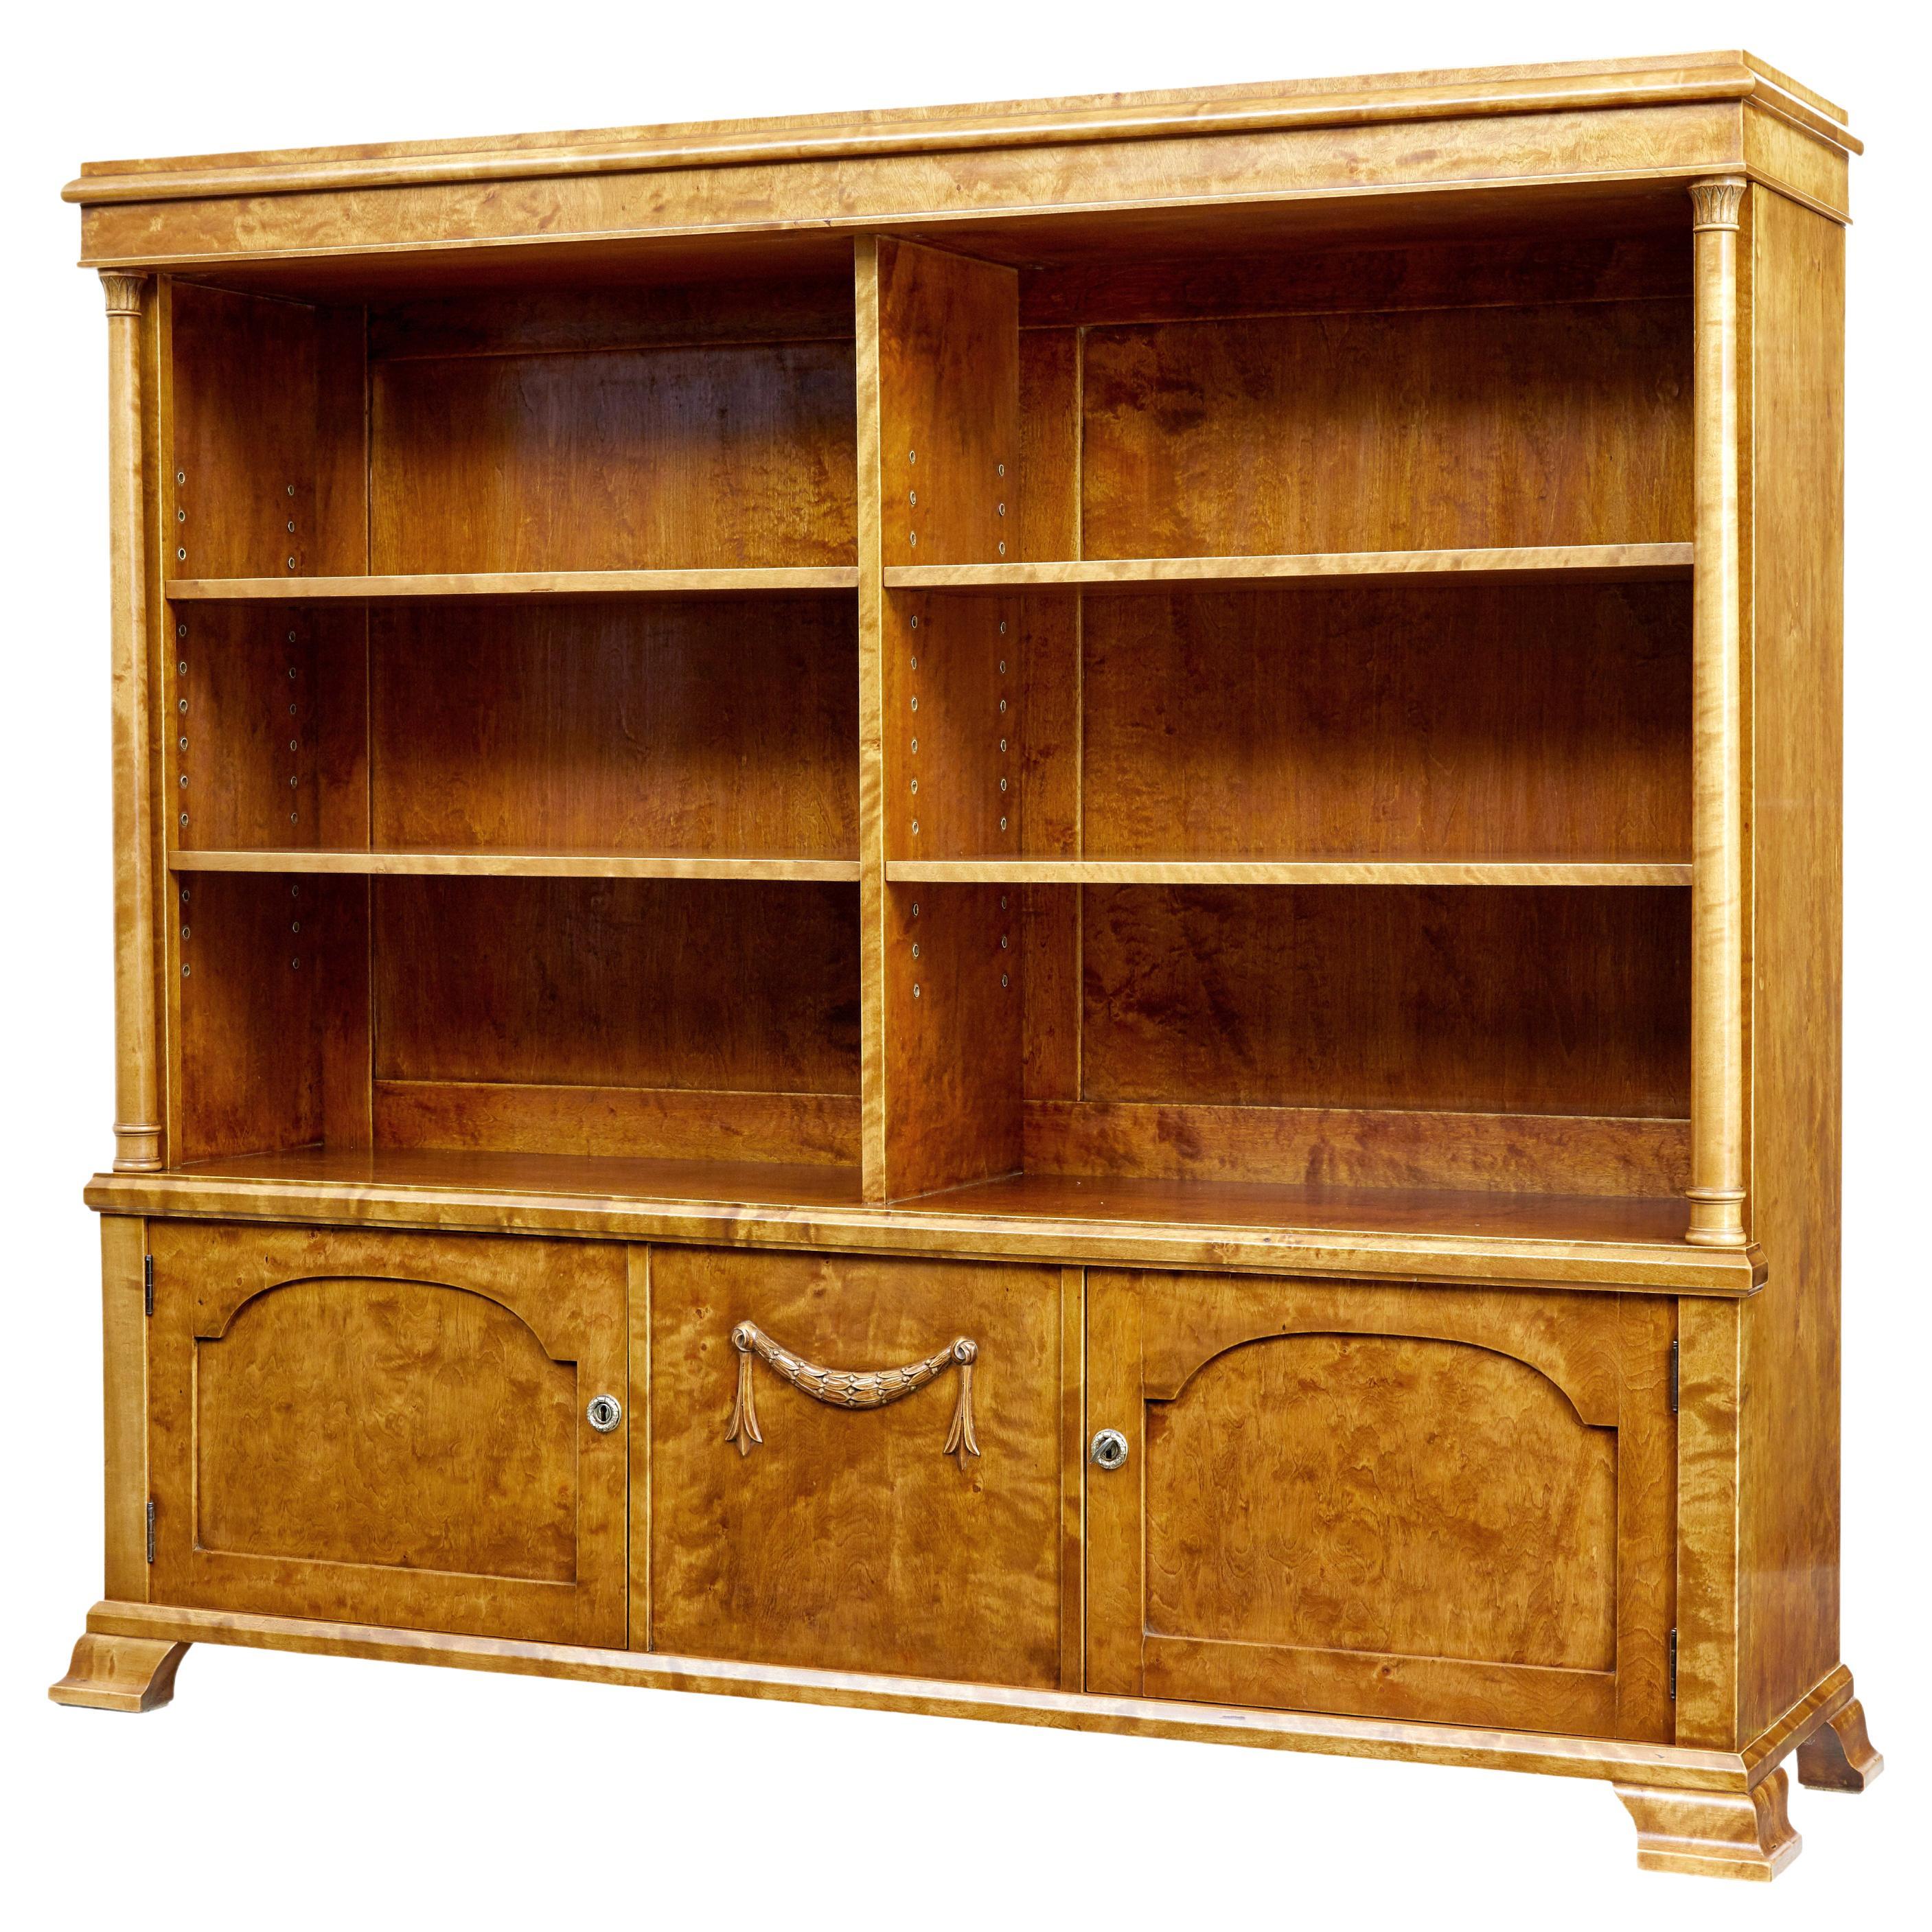 Early 20th century empire revival birch bookcase cabinet For Sale